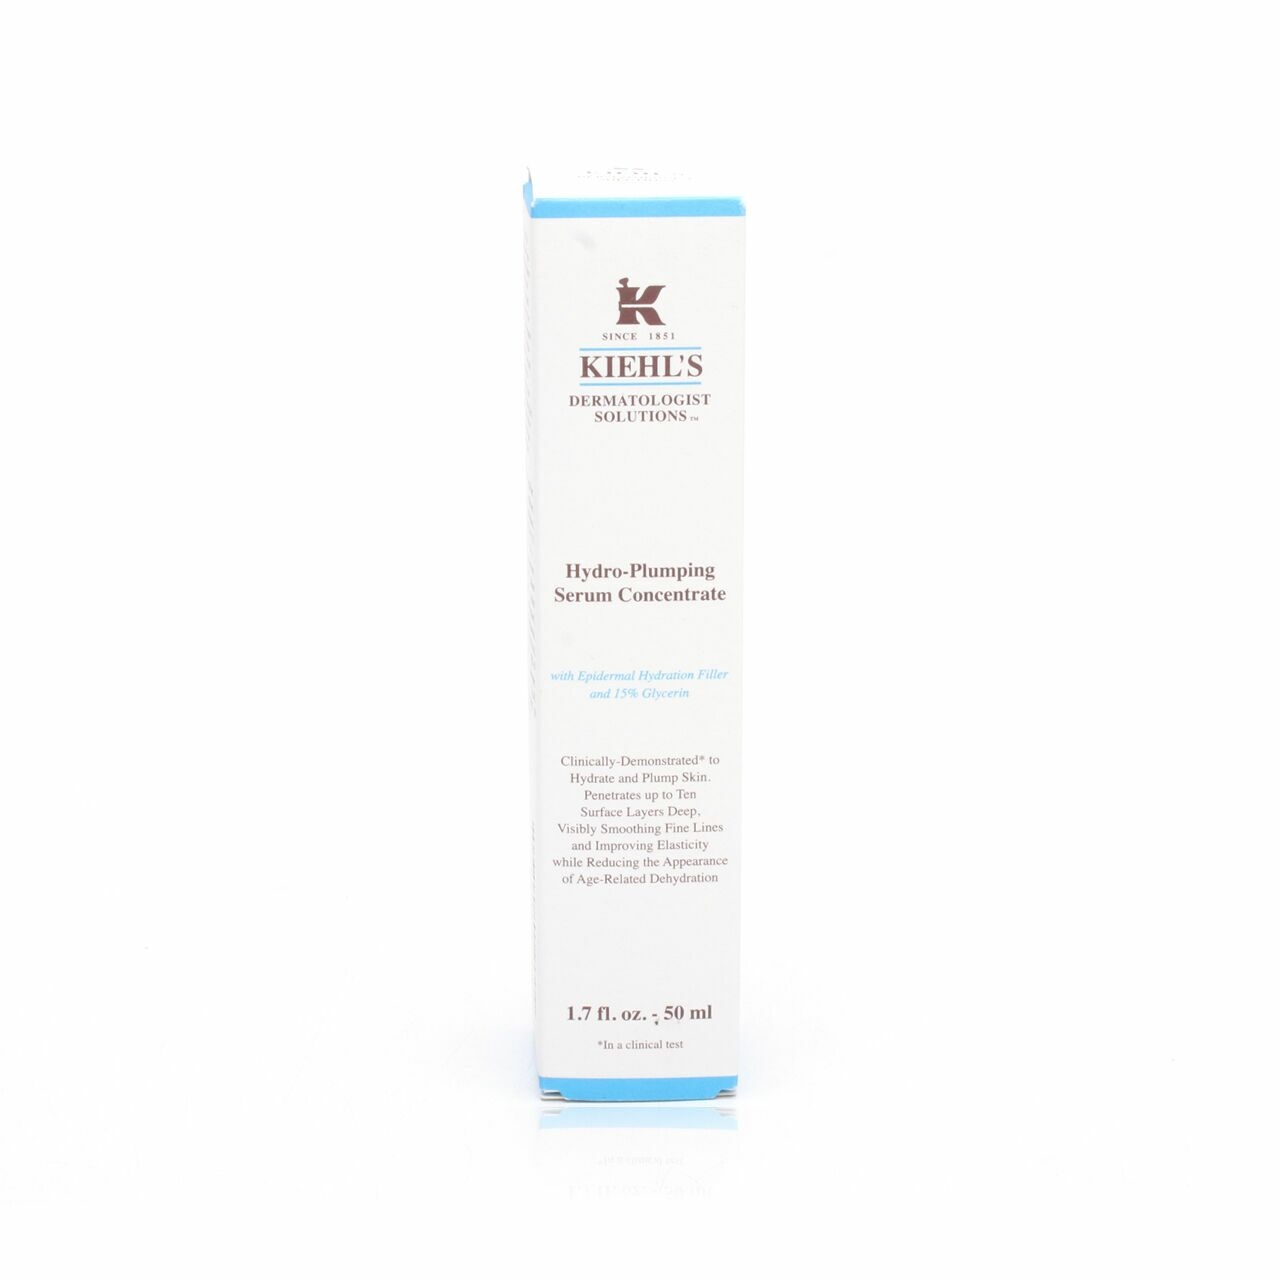 Kiehl's Hydro-Plumping Serum Concentrate Skin Care